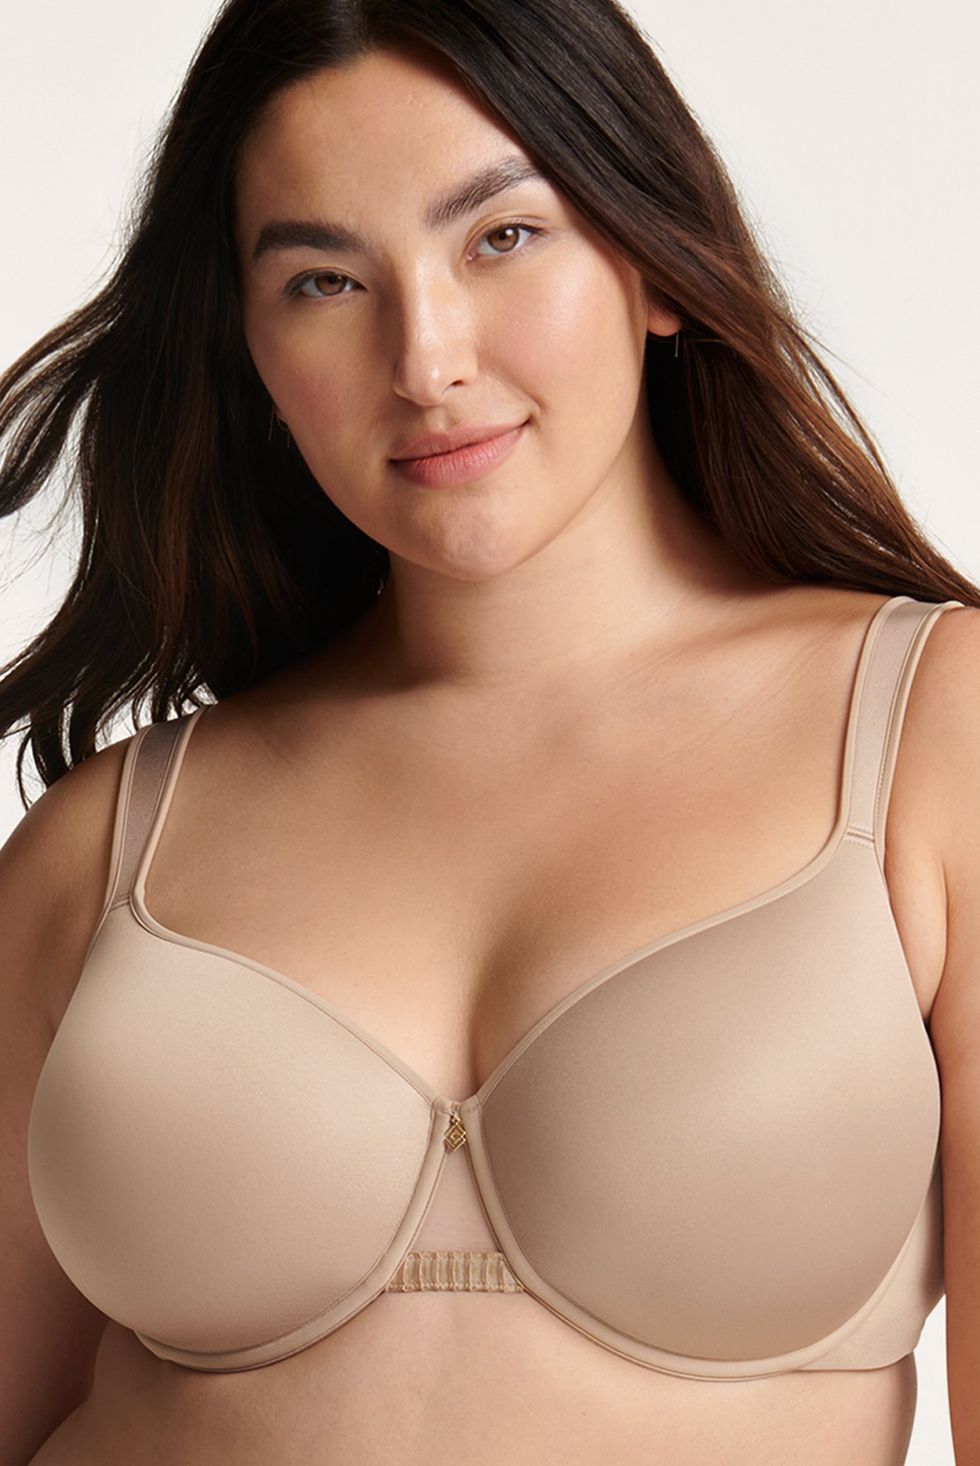 Looking for the best full coverage bra? The 24/7® Perfect Coverage